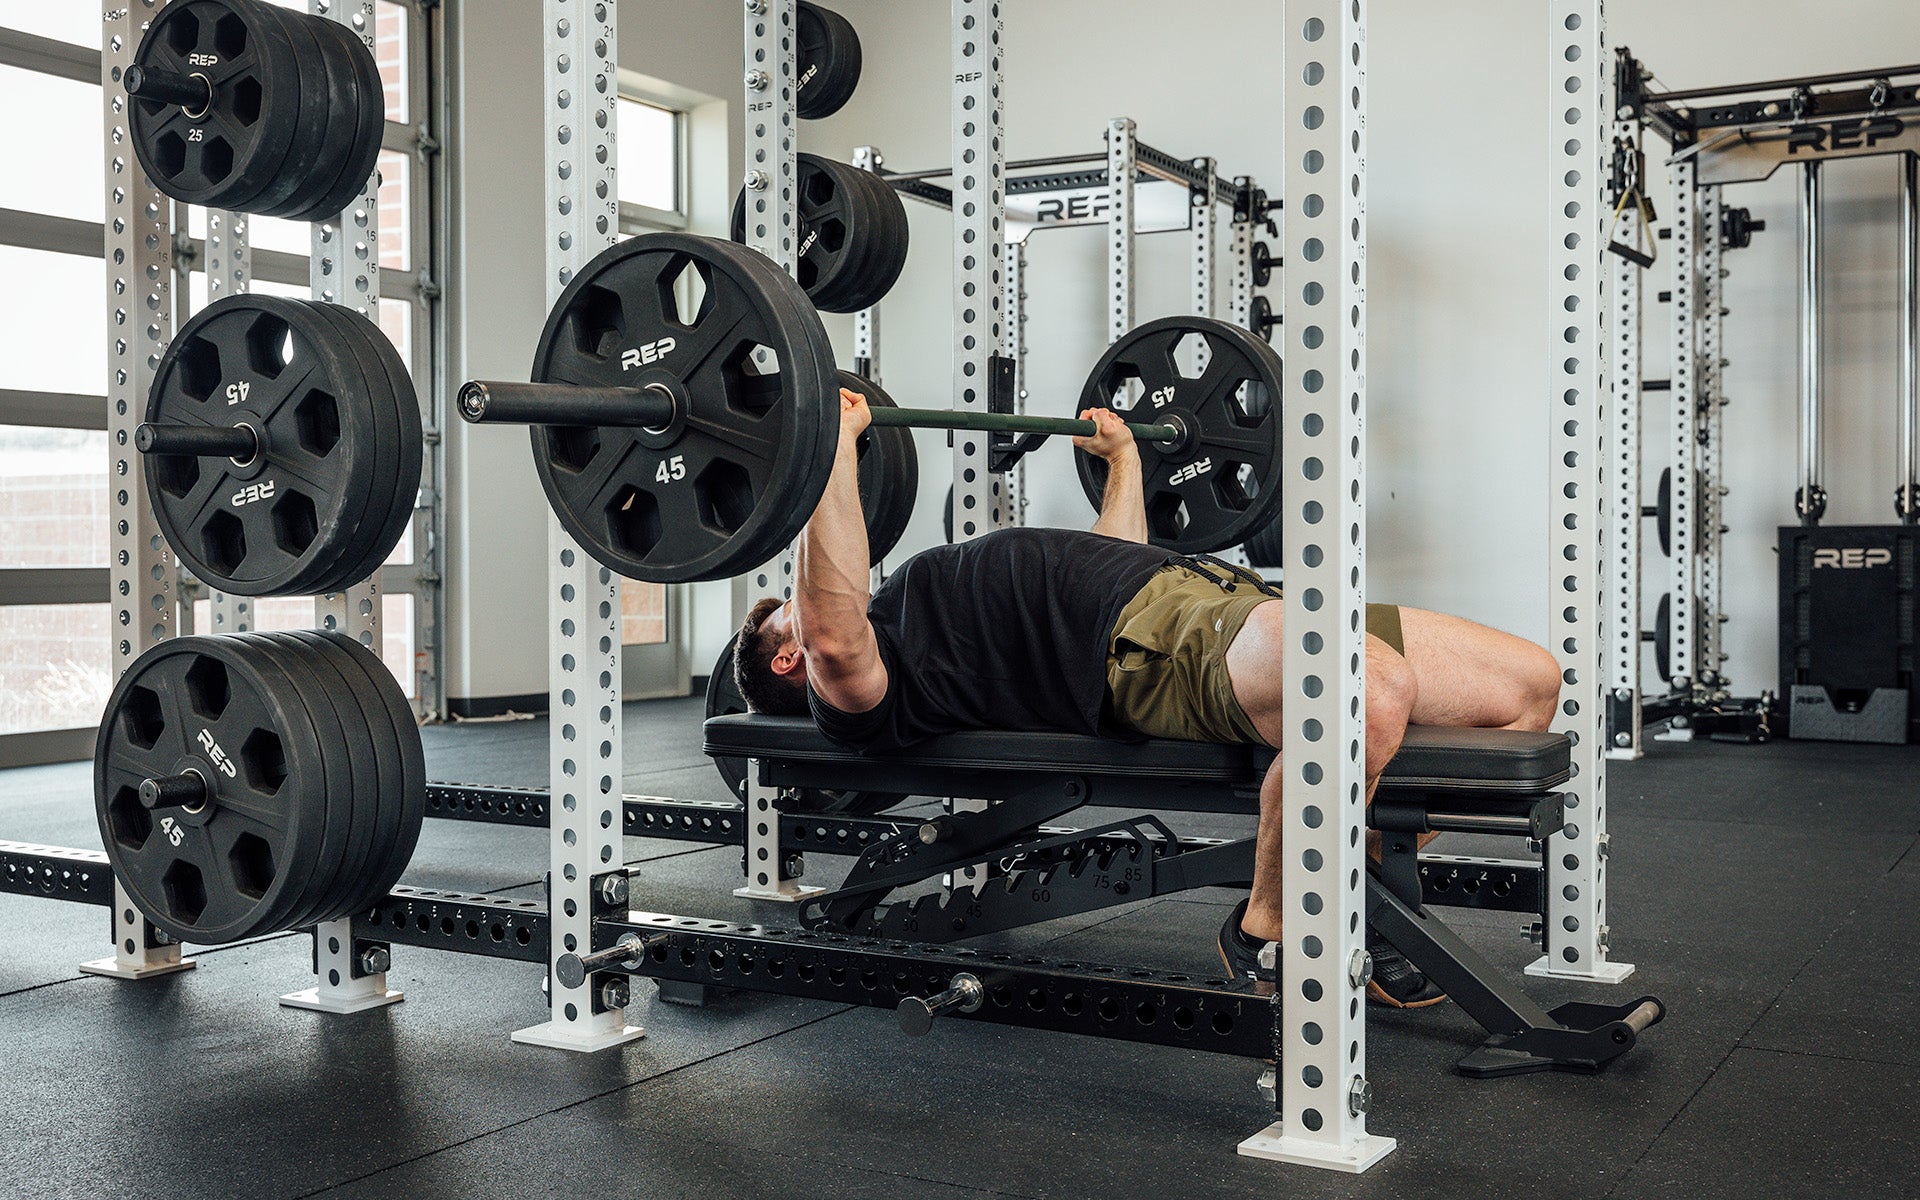 Bench press on the BlackWing bench